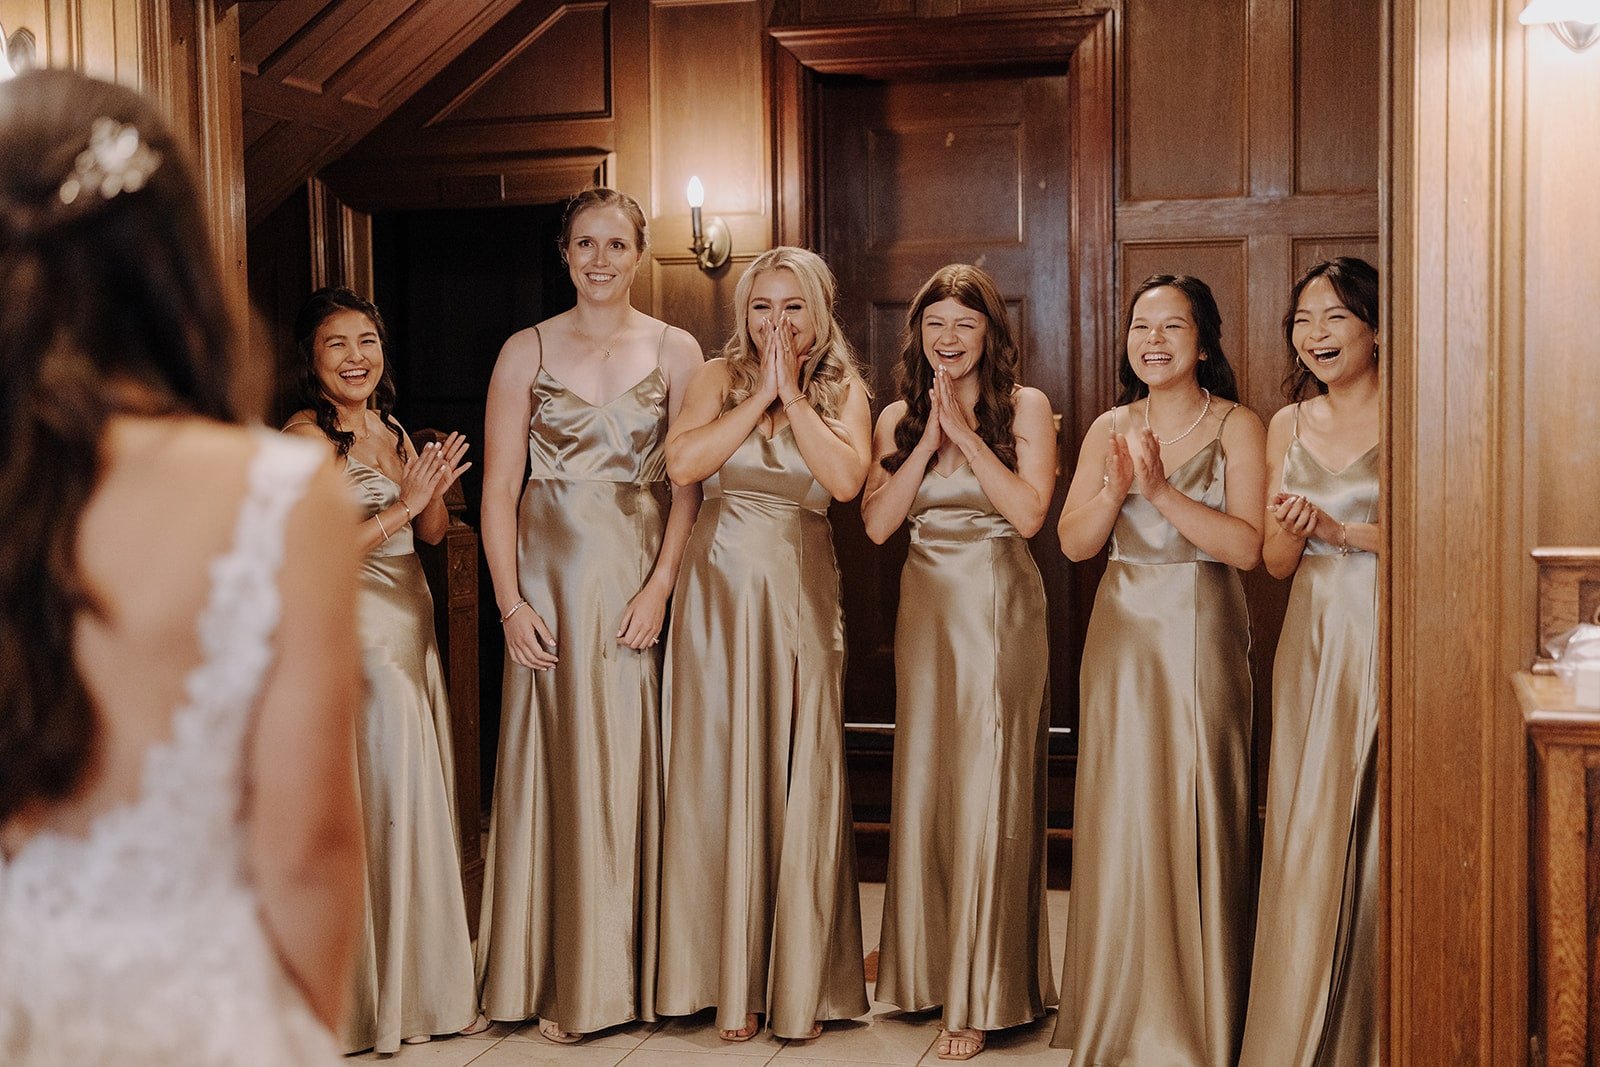 Bridesmaids wearing champagne colored dresses react to first look with the bride